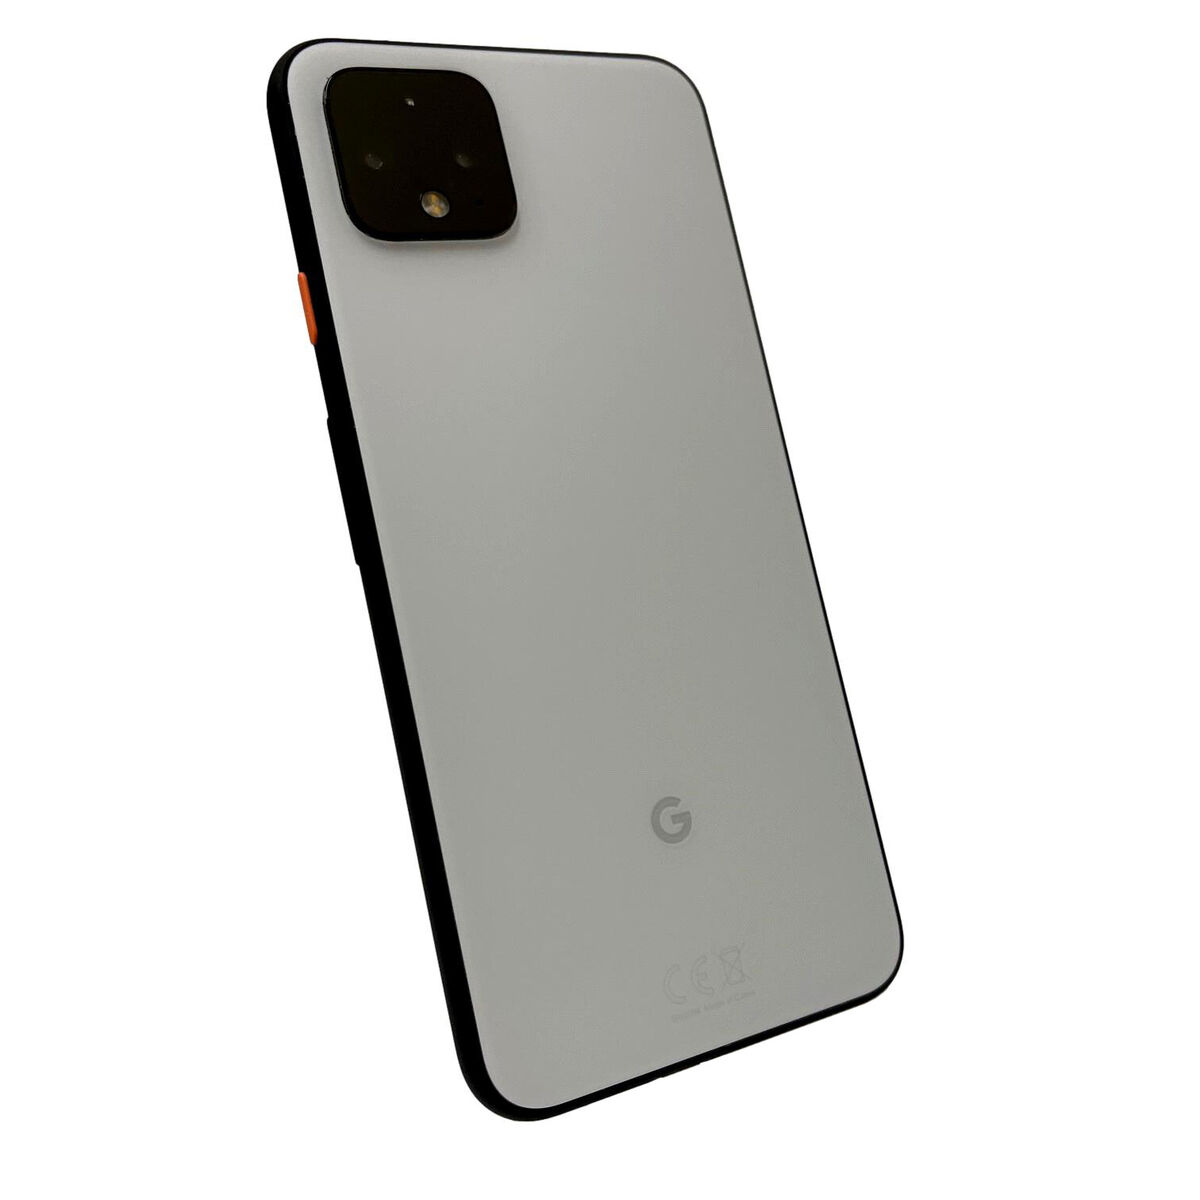 google-pixel-4-release-date-and-launch-details